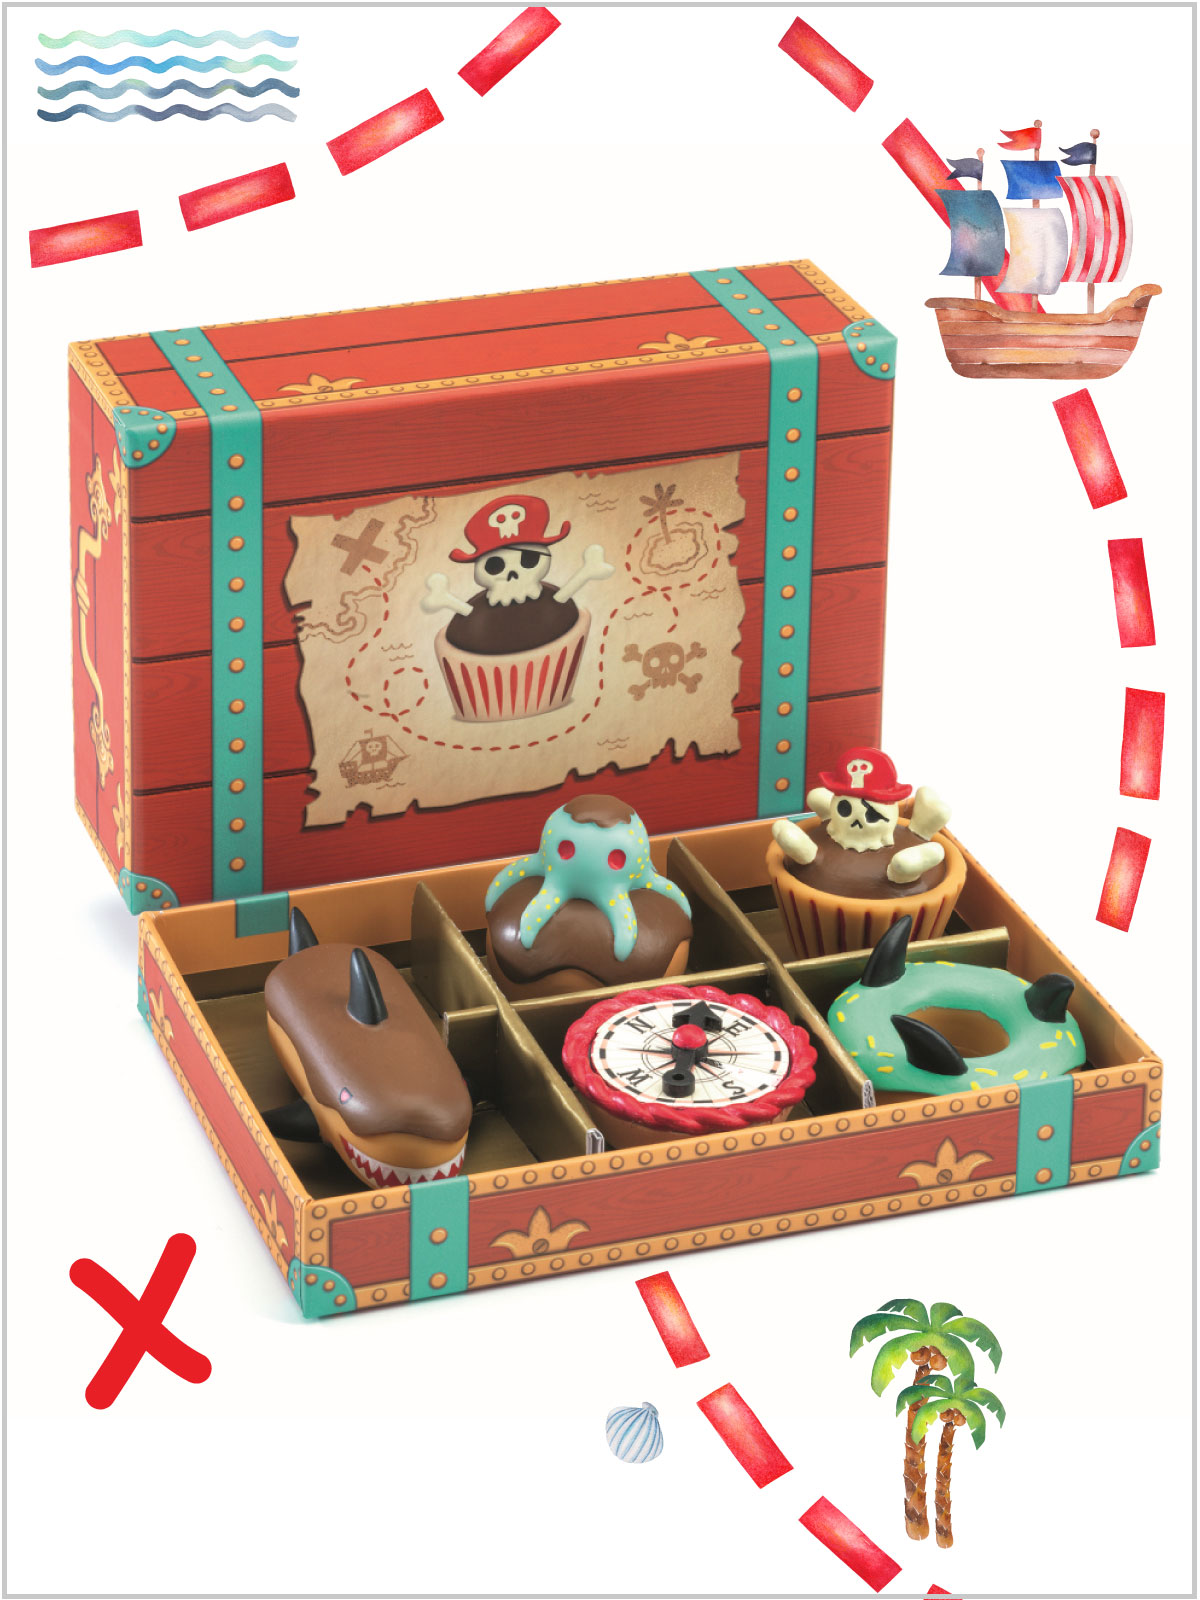 frederickandsophie-kids-toys-djeco-wooden-pirate-sweets-cake-set